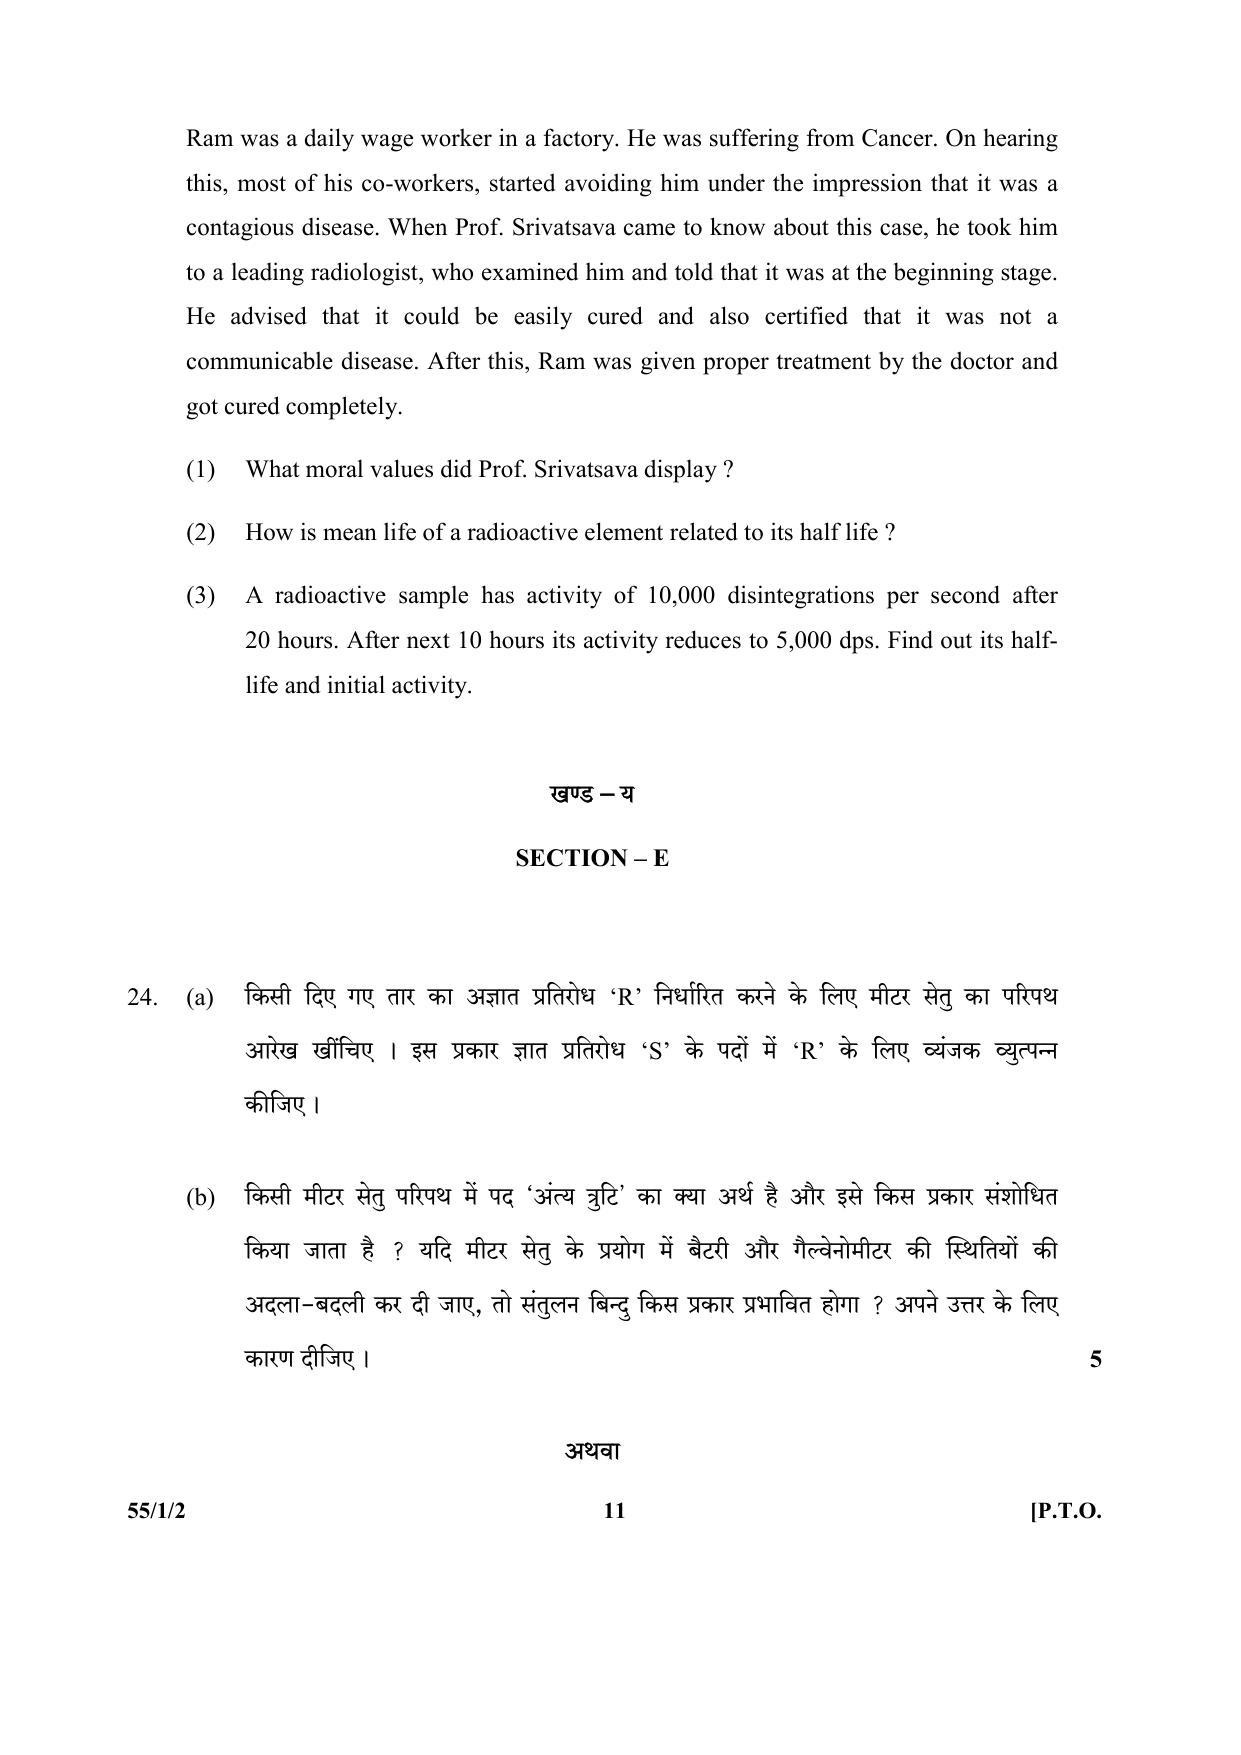 CBSE Class 12 55-1-2 (Physics) 2017-comptt Question Paper - Page 11